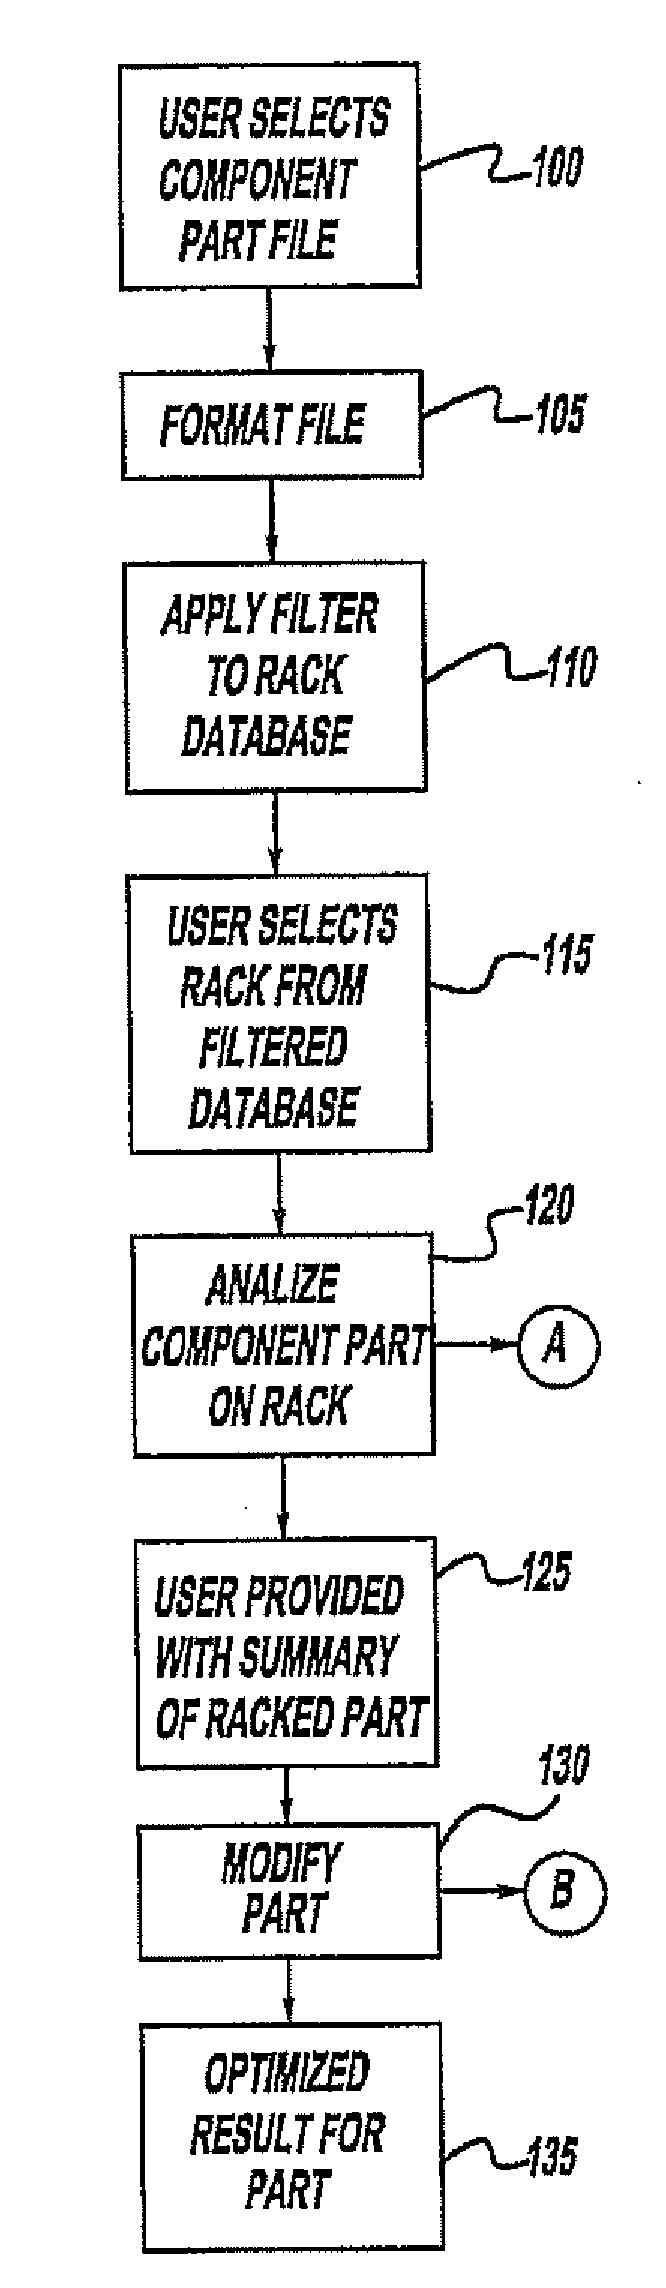 System and method of interactively optimizing shipping density for a container